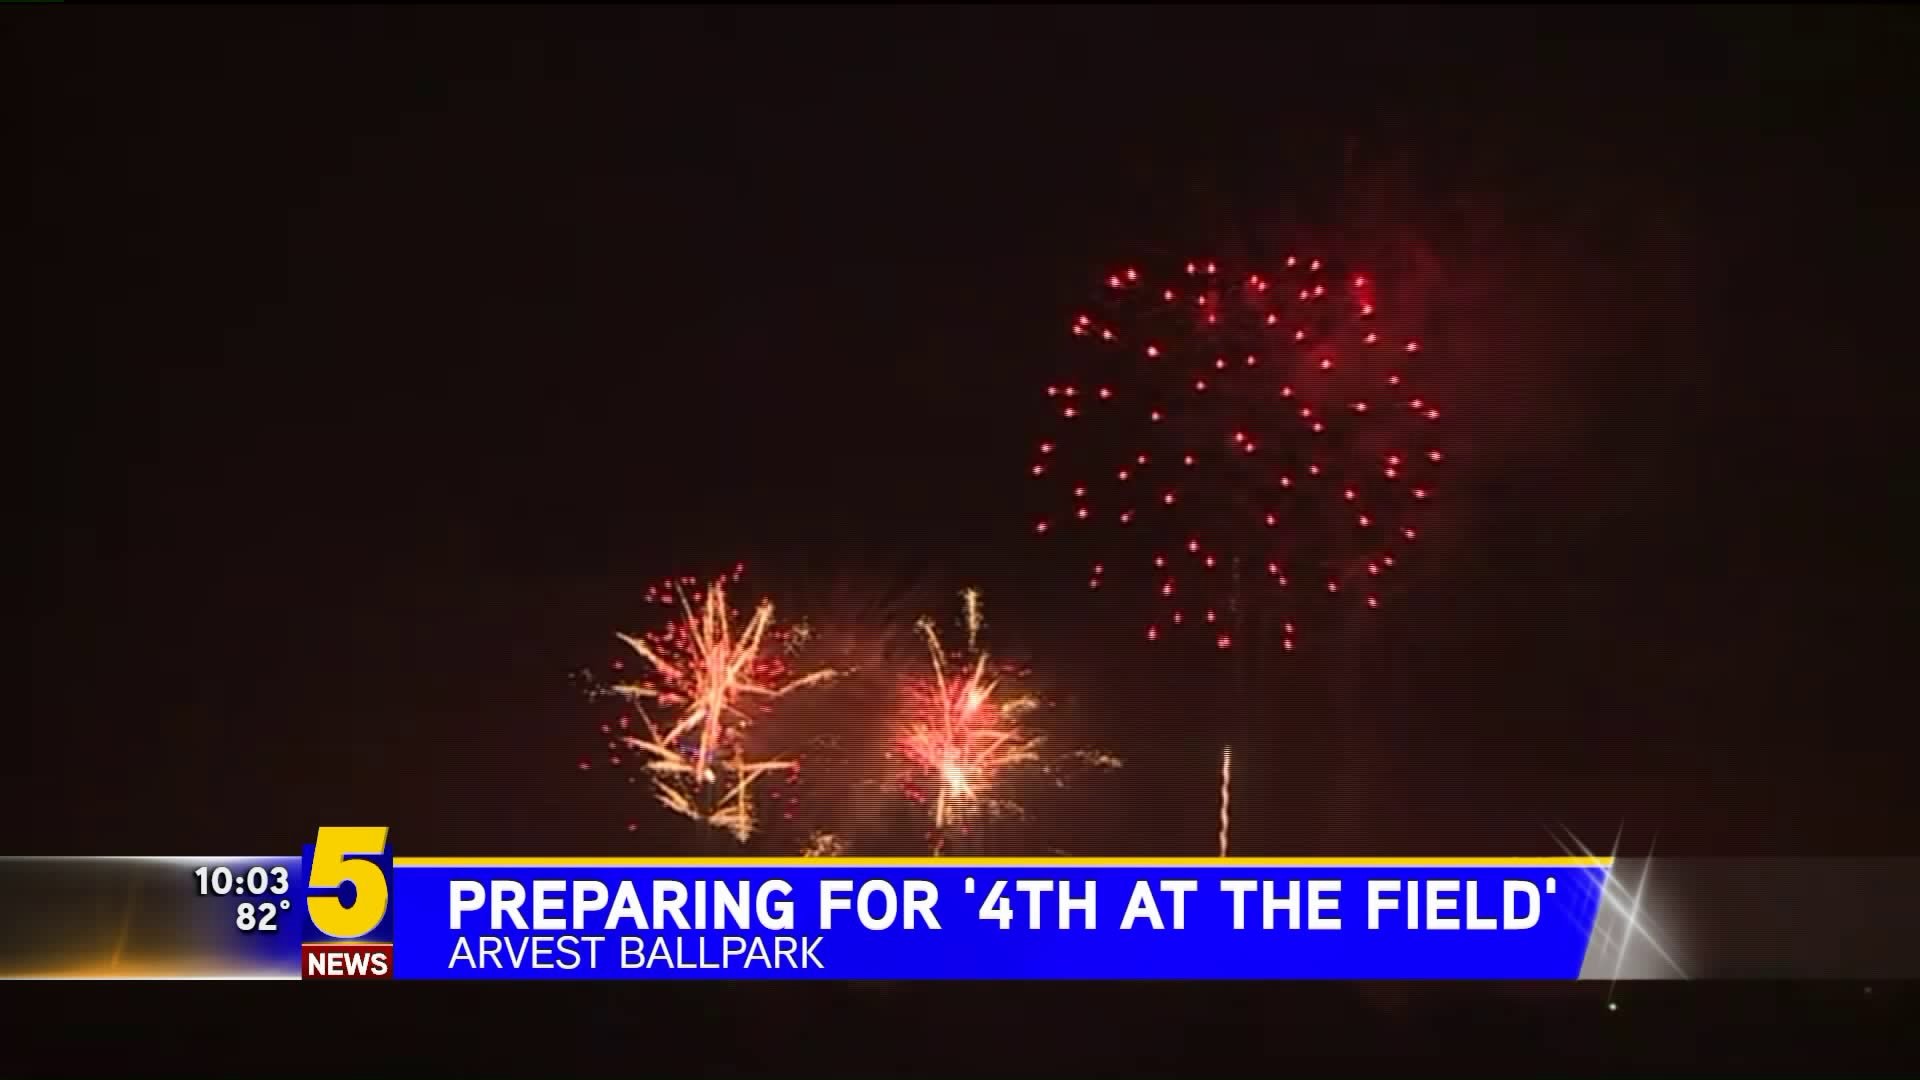 Preparing for "4th at the Field" at Arvest Ballpark